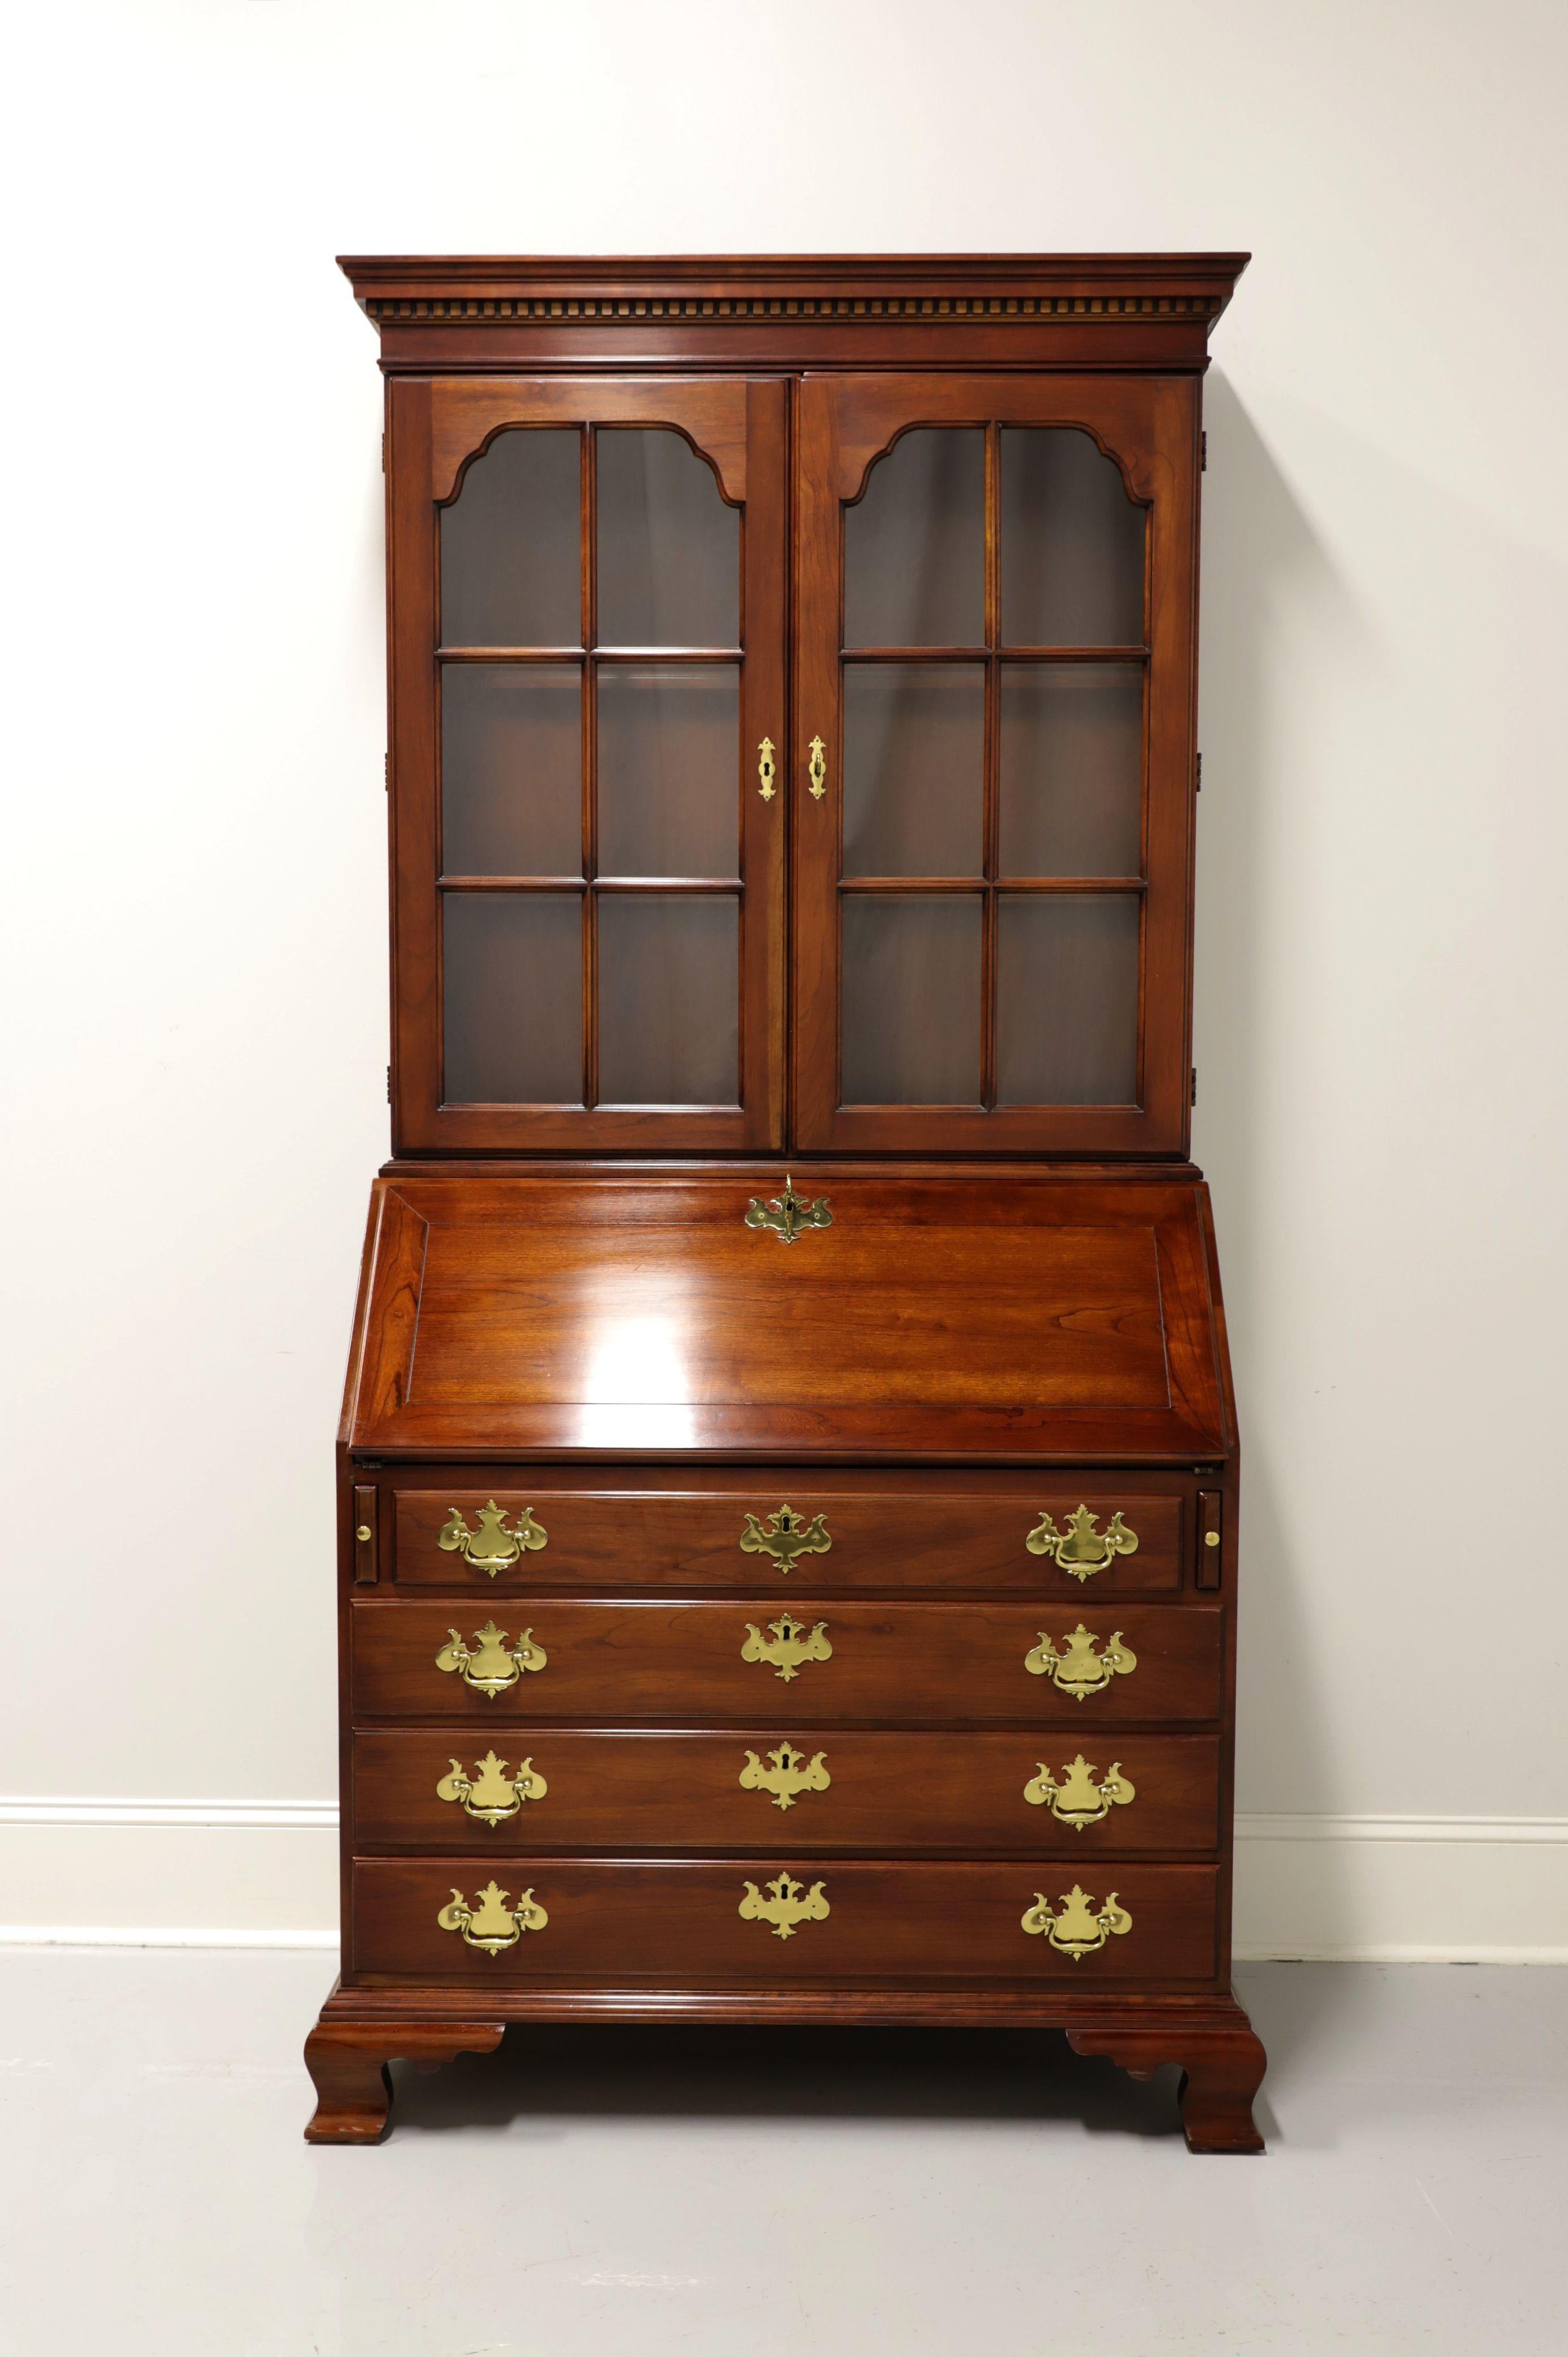 A Charlestown secretary desk in the Chippendale style by Statton, from their Centennial Collection. Solid cherry with brass hardware, crown & dentil moulding to top and ogee bracket feet. Features upper lighted cabinet with two six-pane glass doors